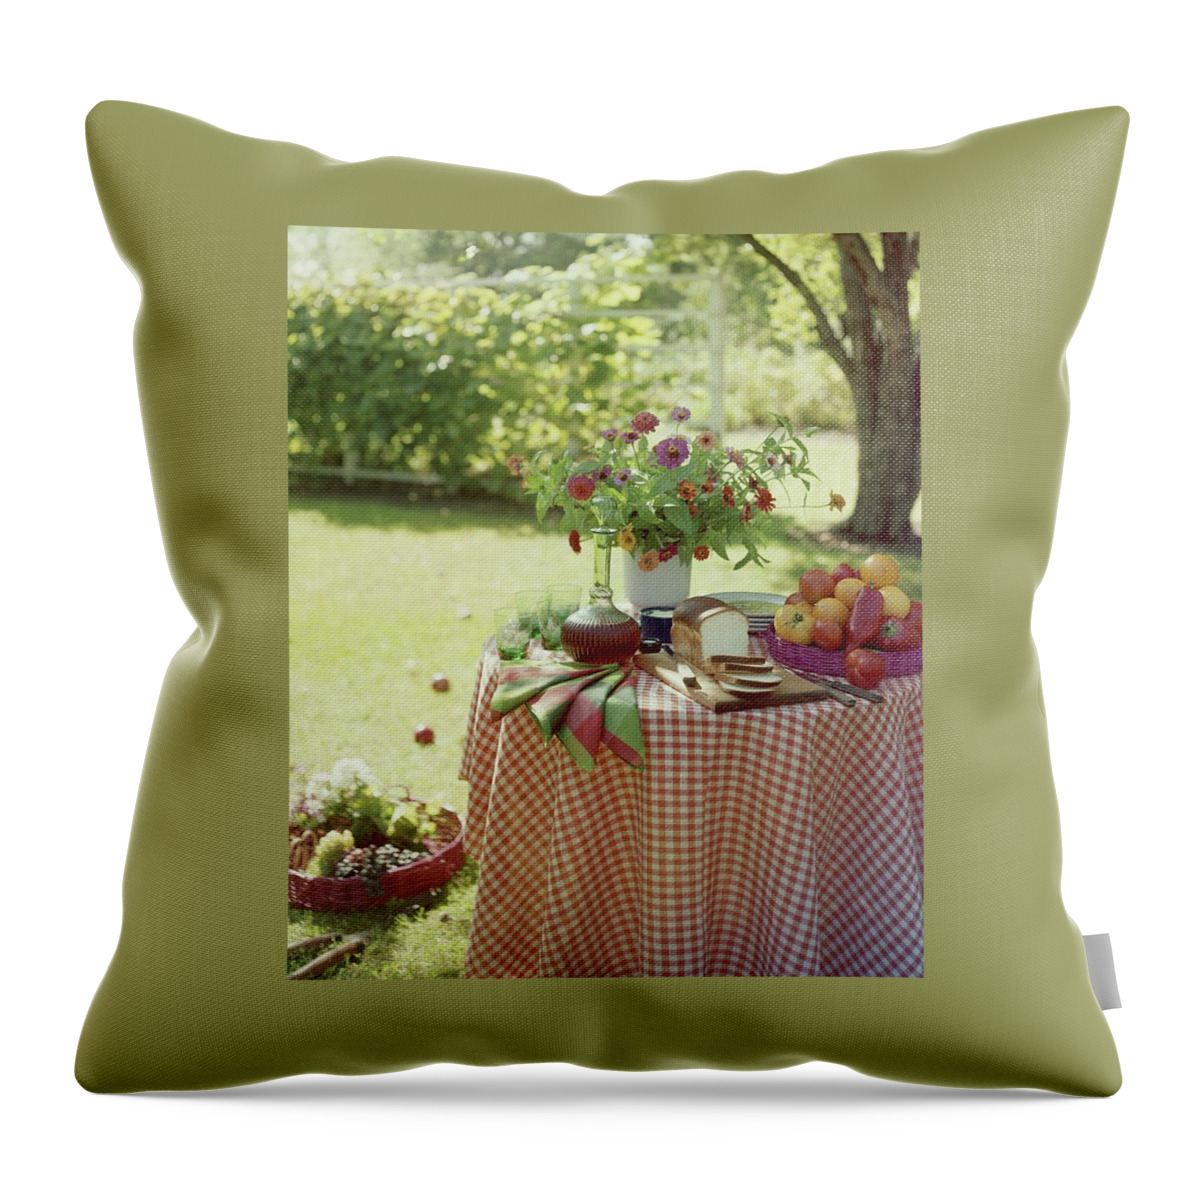 Outdoor Lunch In The Shade Of A Tree Throw Pillow